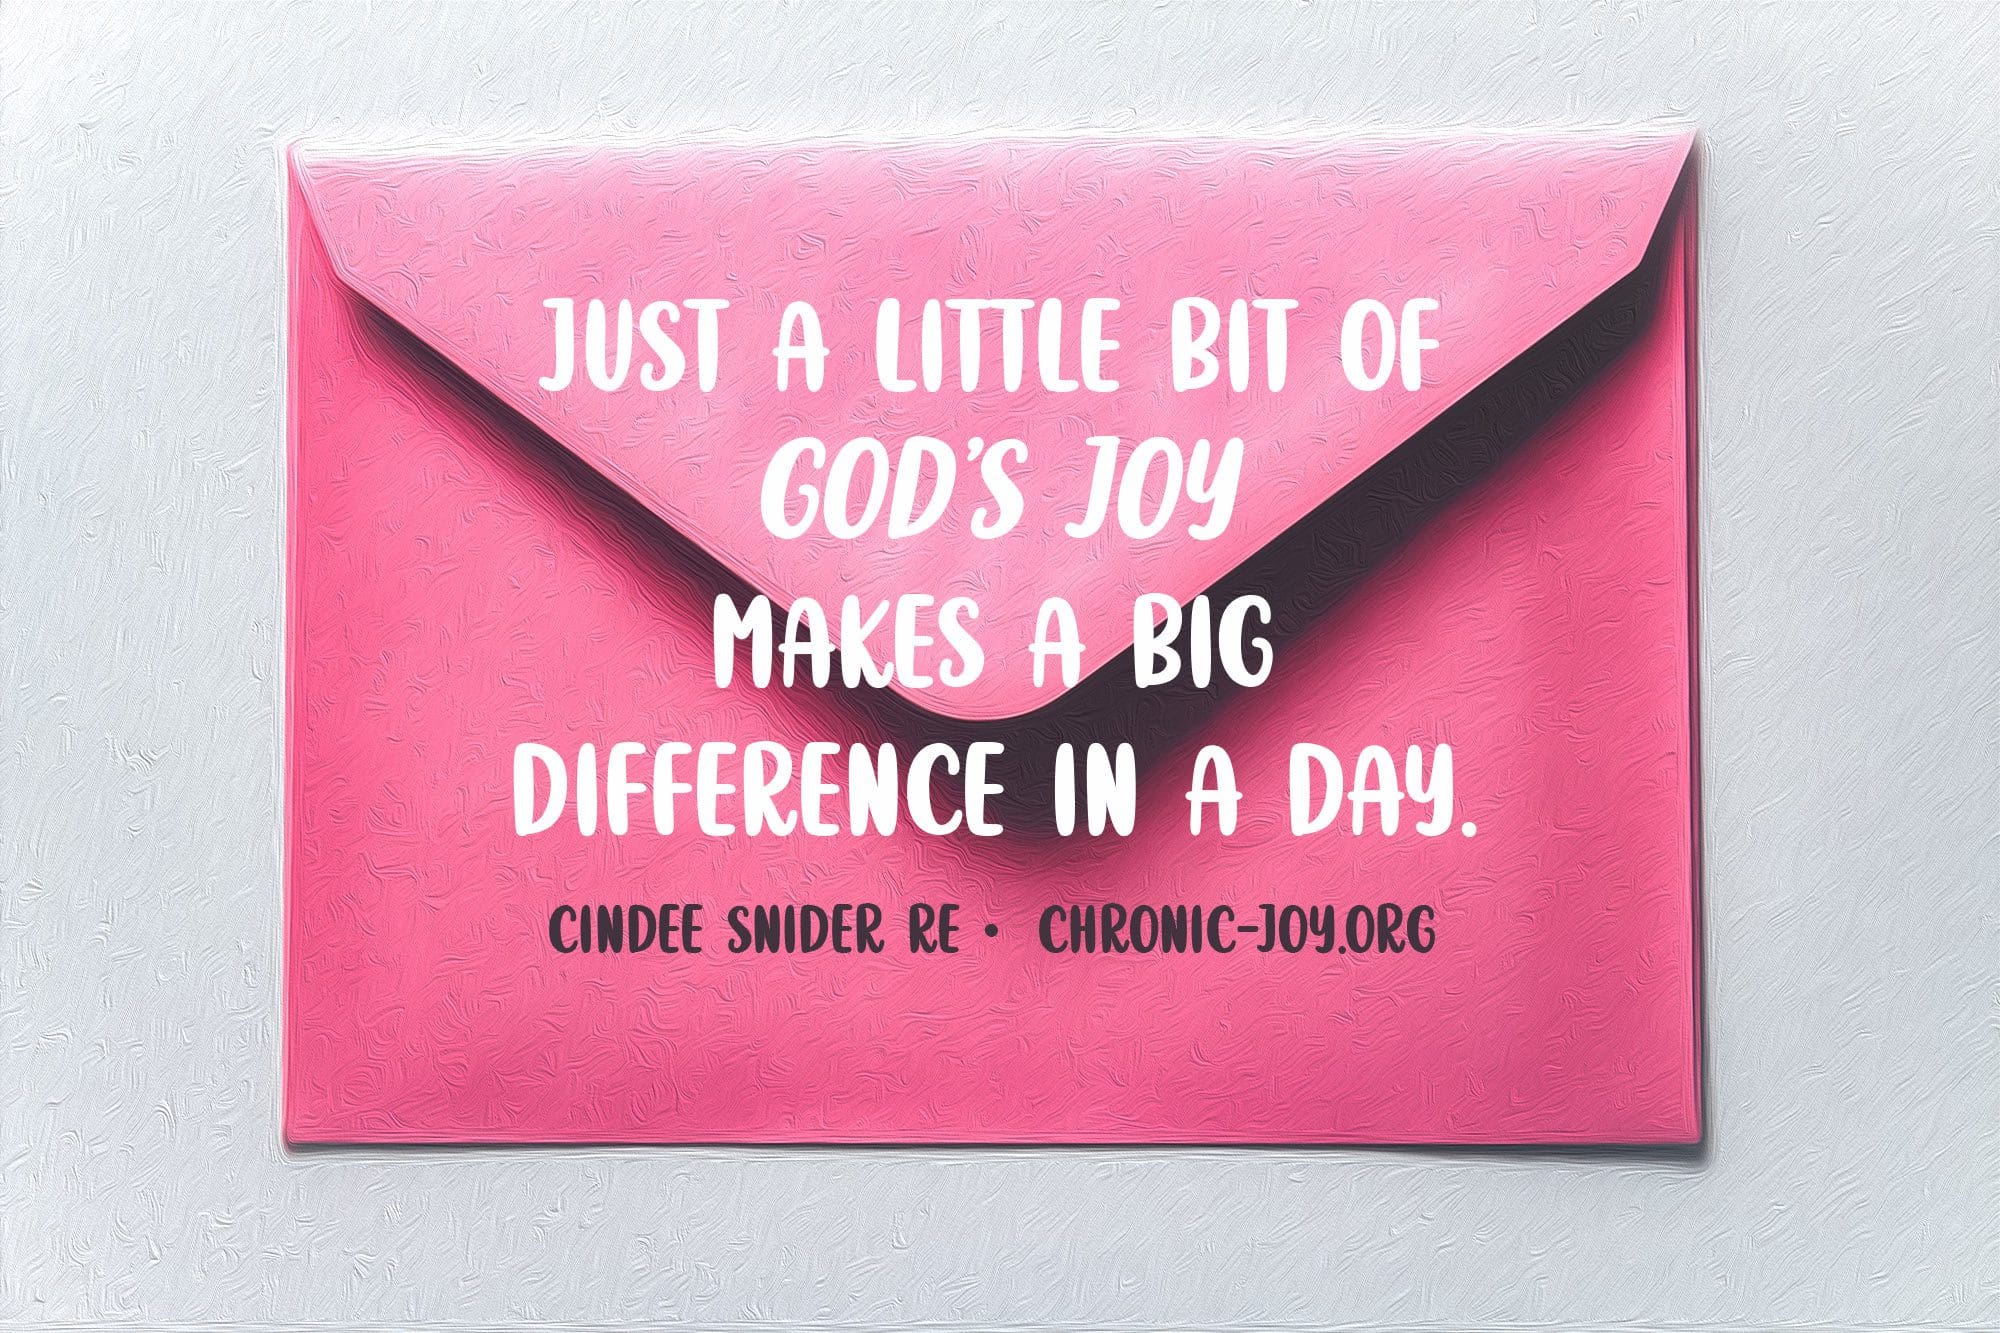 "Just a little bit of God's joy makes a big difference in a day." Cindee Snider Re